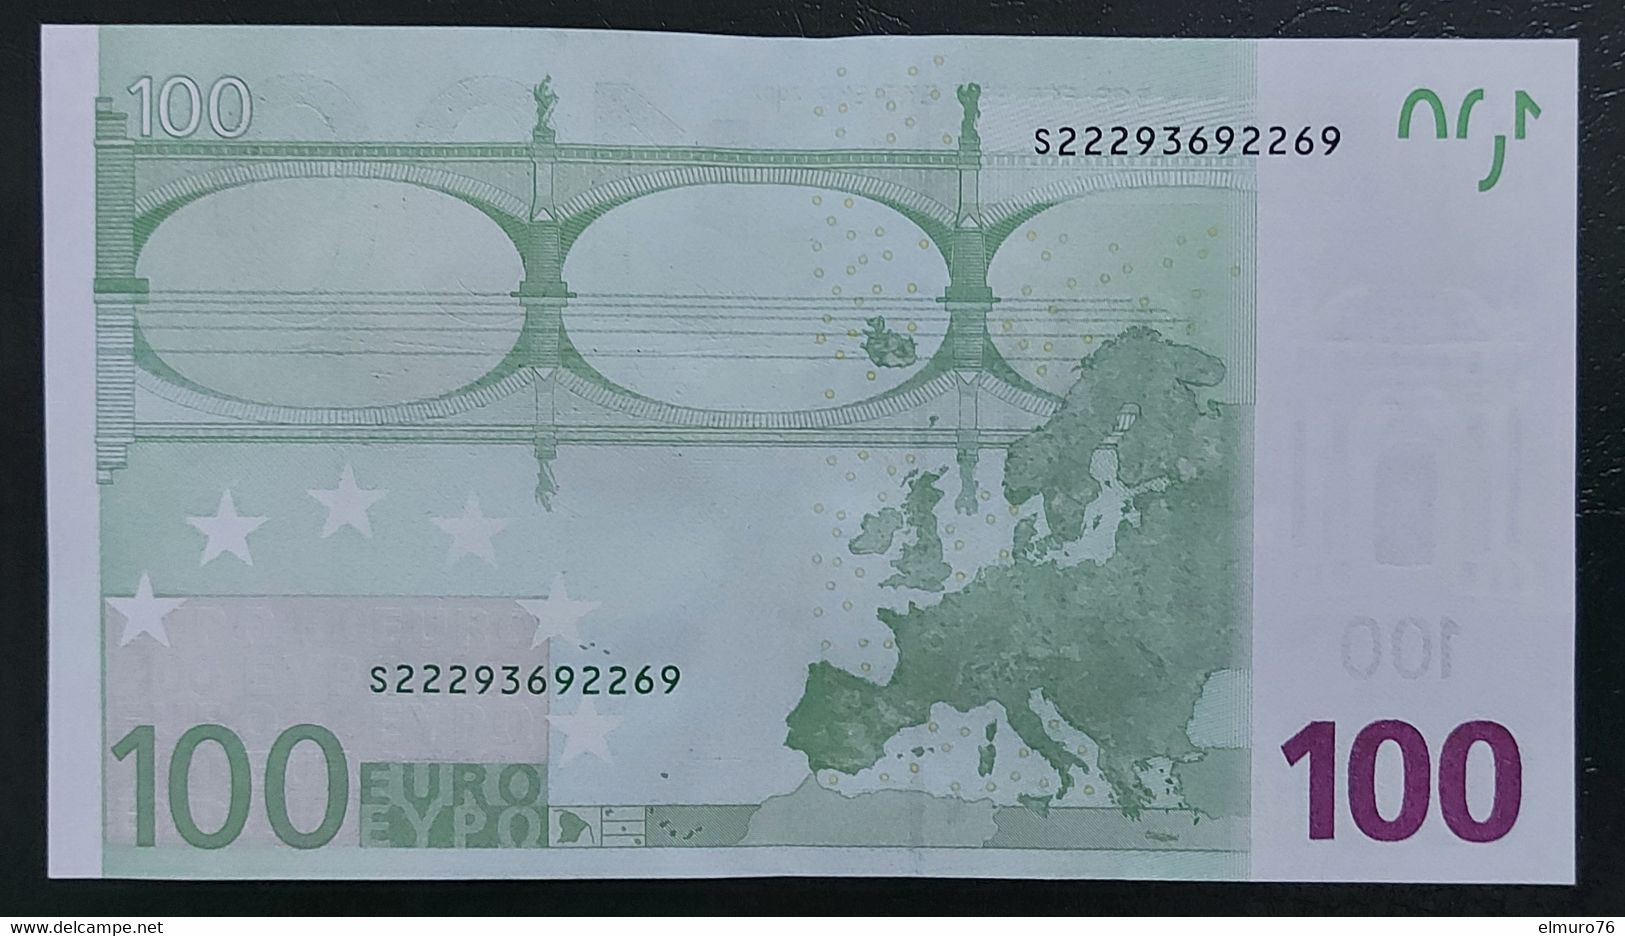 100 EURO J029B4 Italy Serie S About Uncirculated - 100 Euro